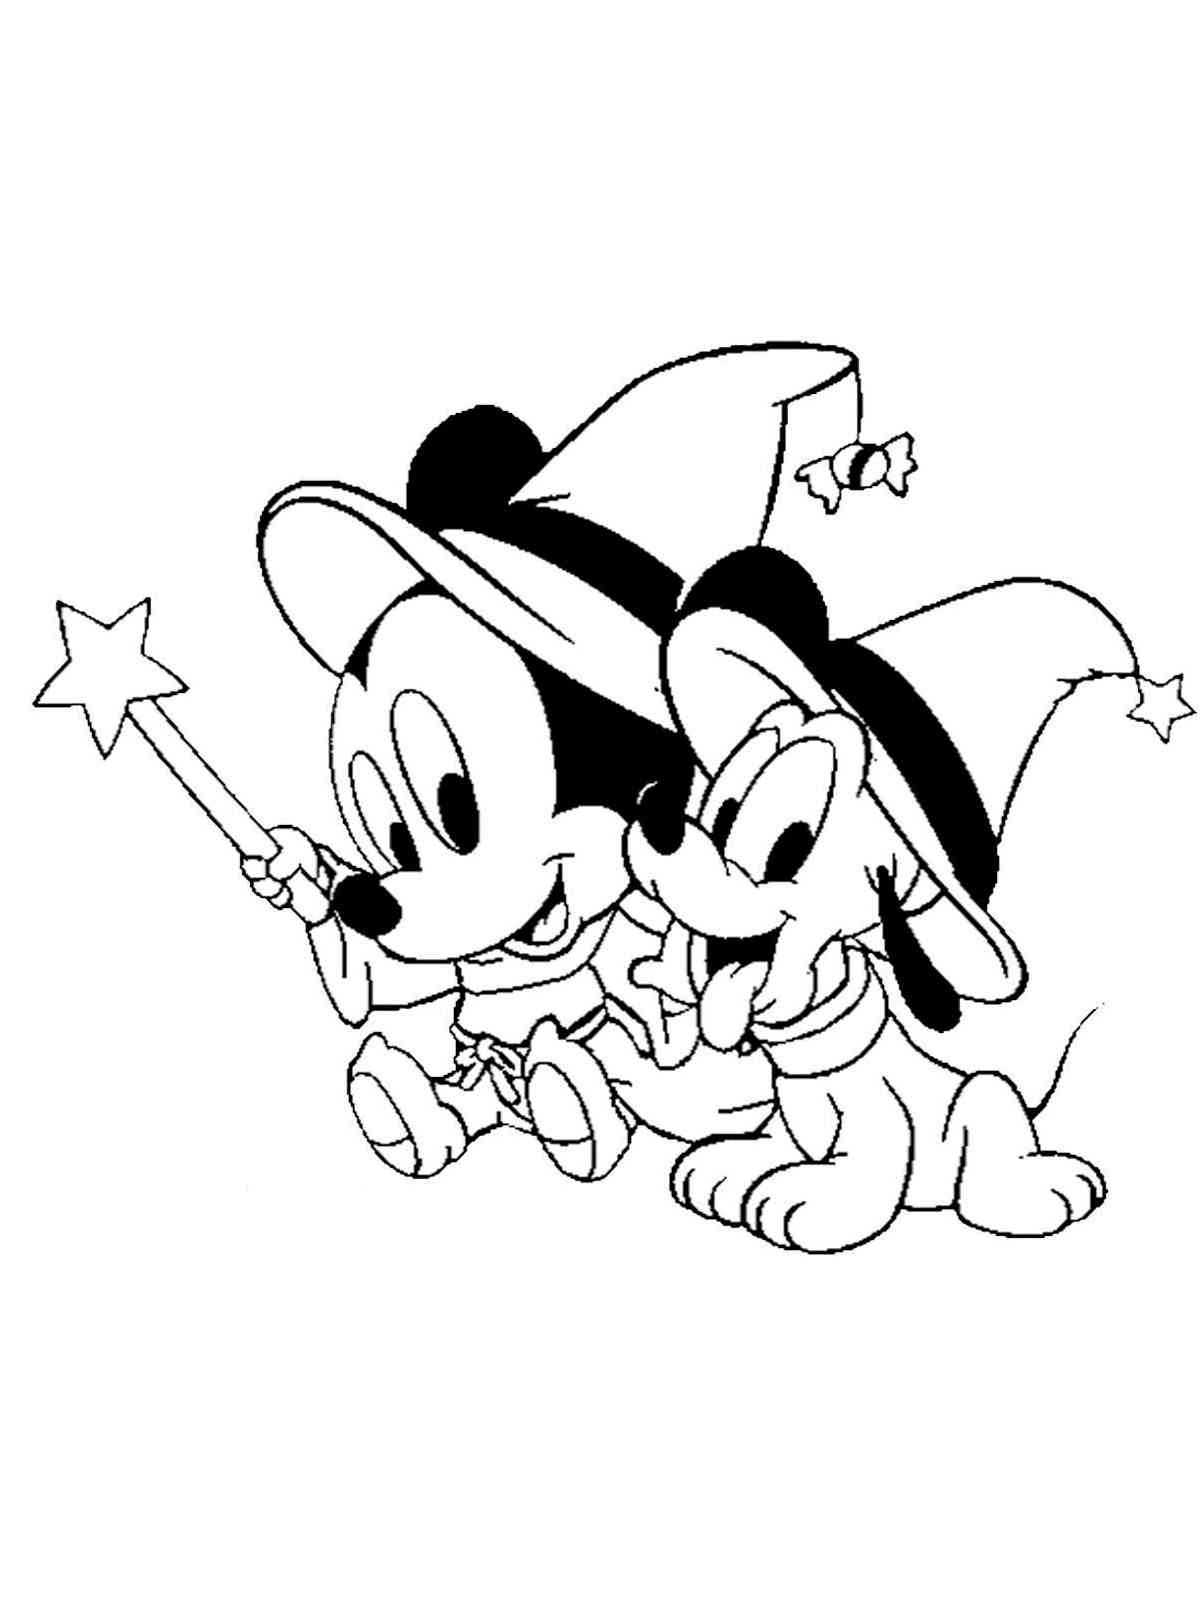 Disney Halloween 7 coloring page